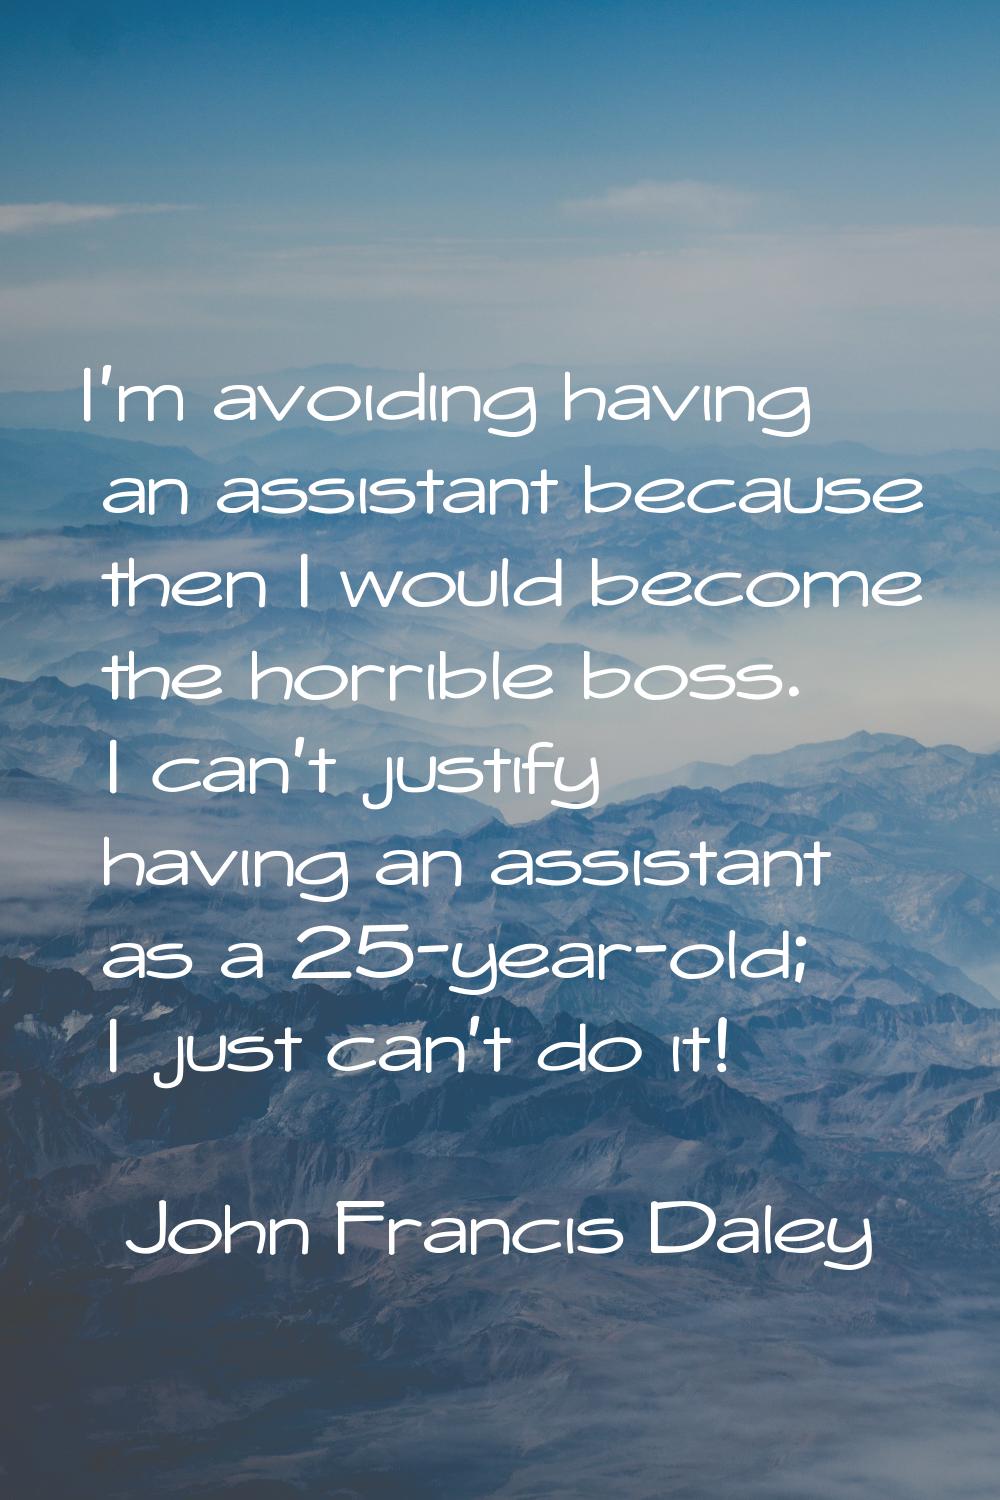 I'm avoiding having an assistant because then I would become the horrible boss. I can't justify hav